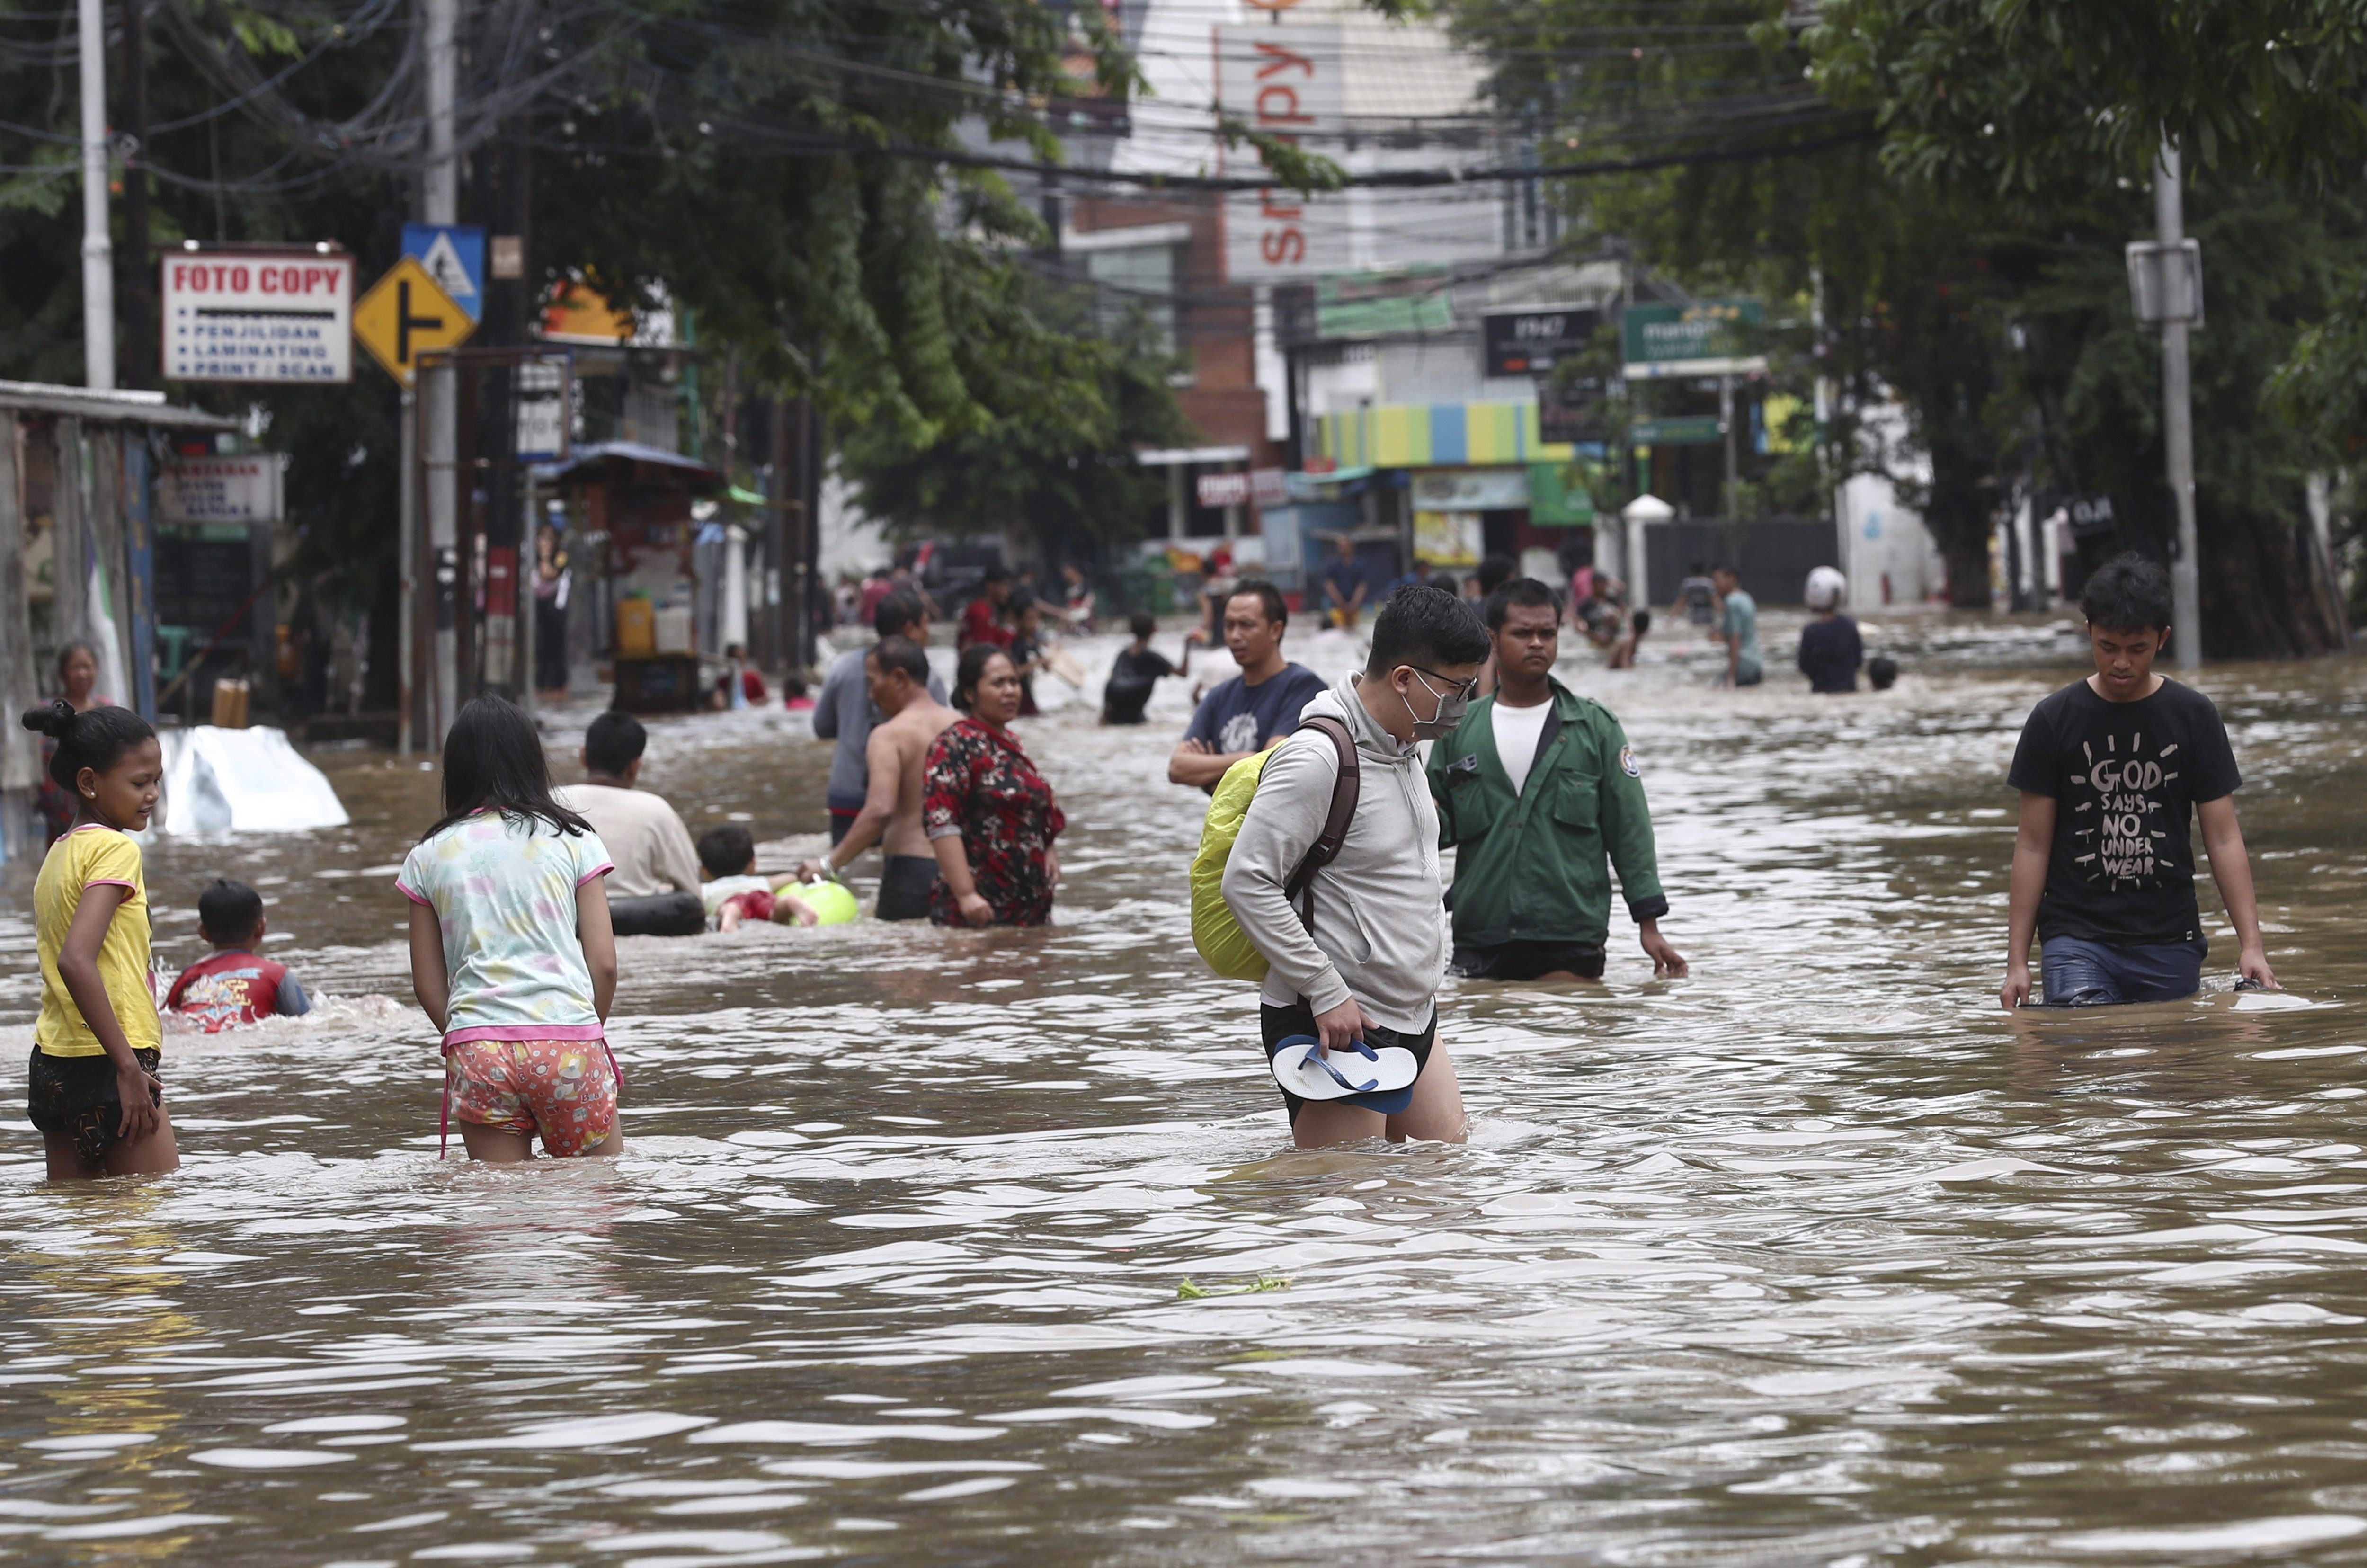 Floods in Indonesia’s sinking Jakarta claim 5 lives | Daily Sabah